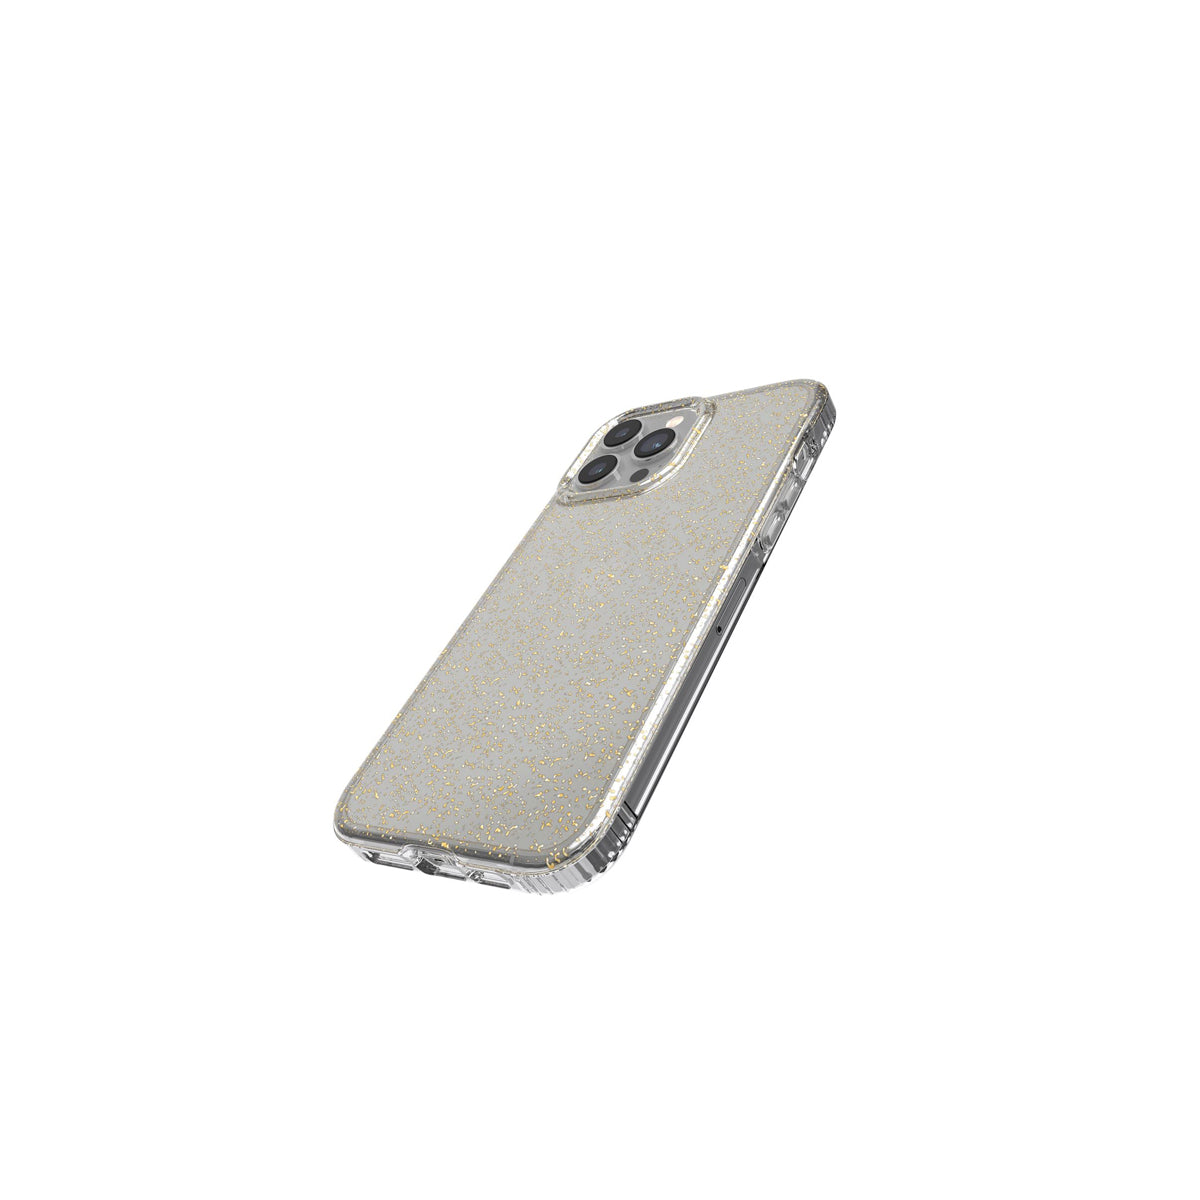 Tech21 Evo Sparkle Phone Case for iPhone 13 Pro Max.